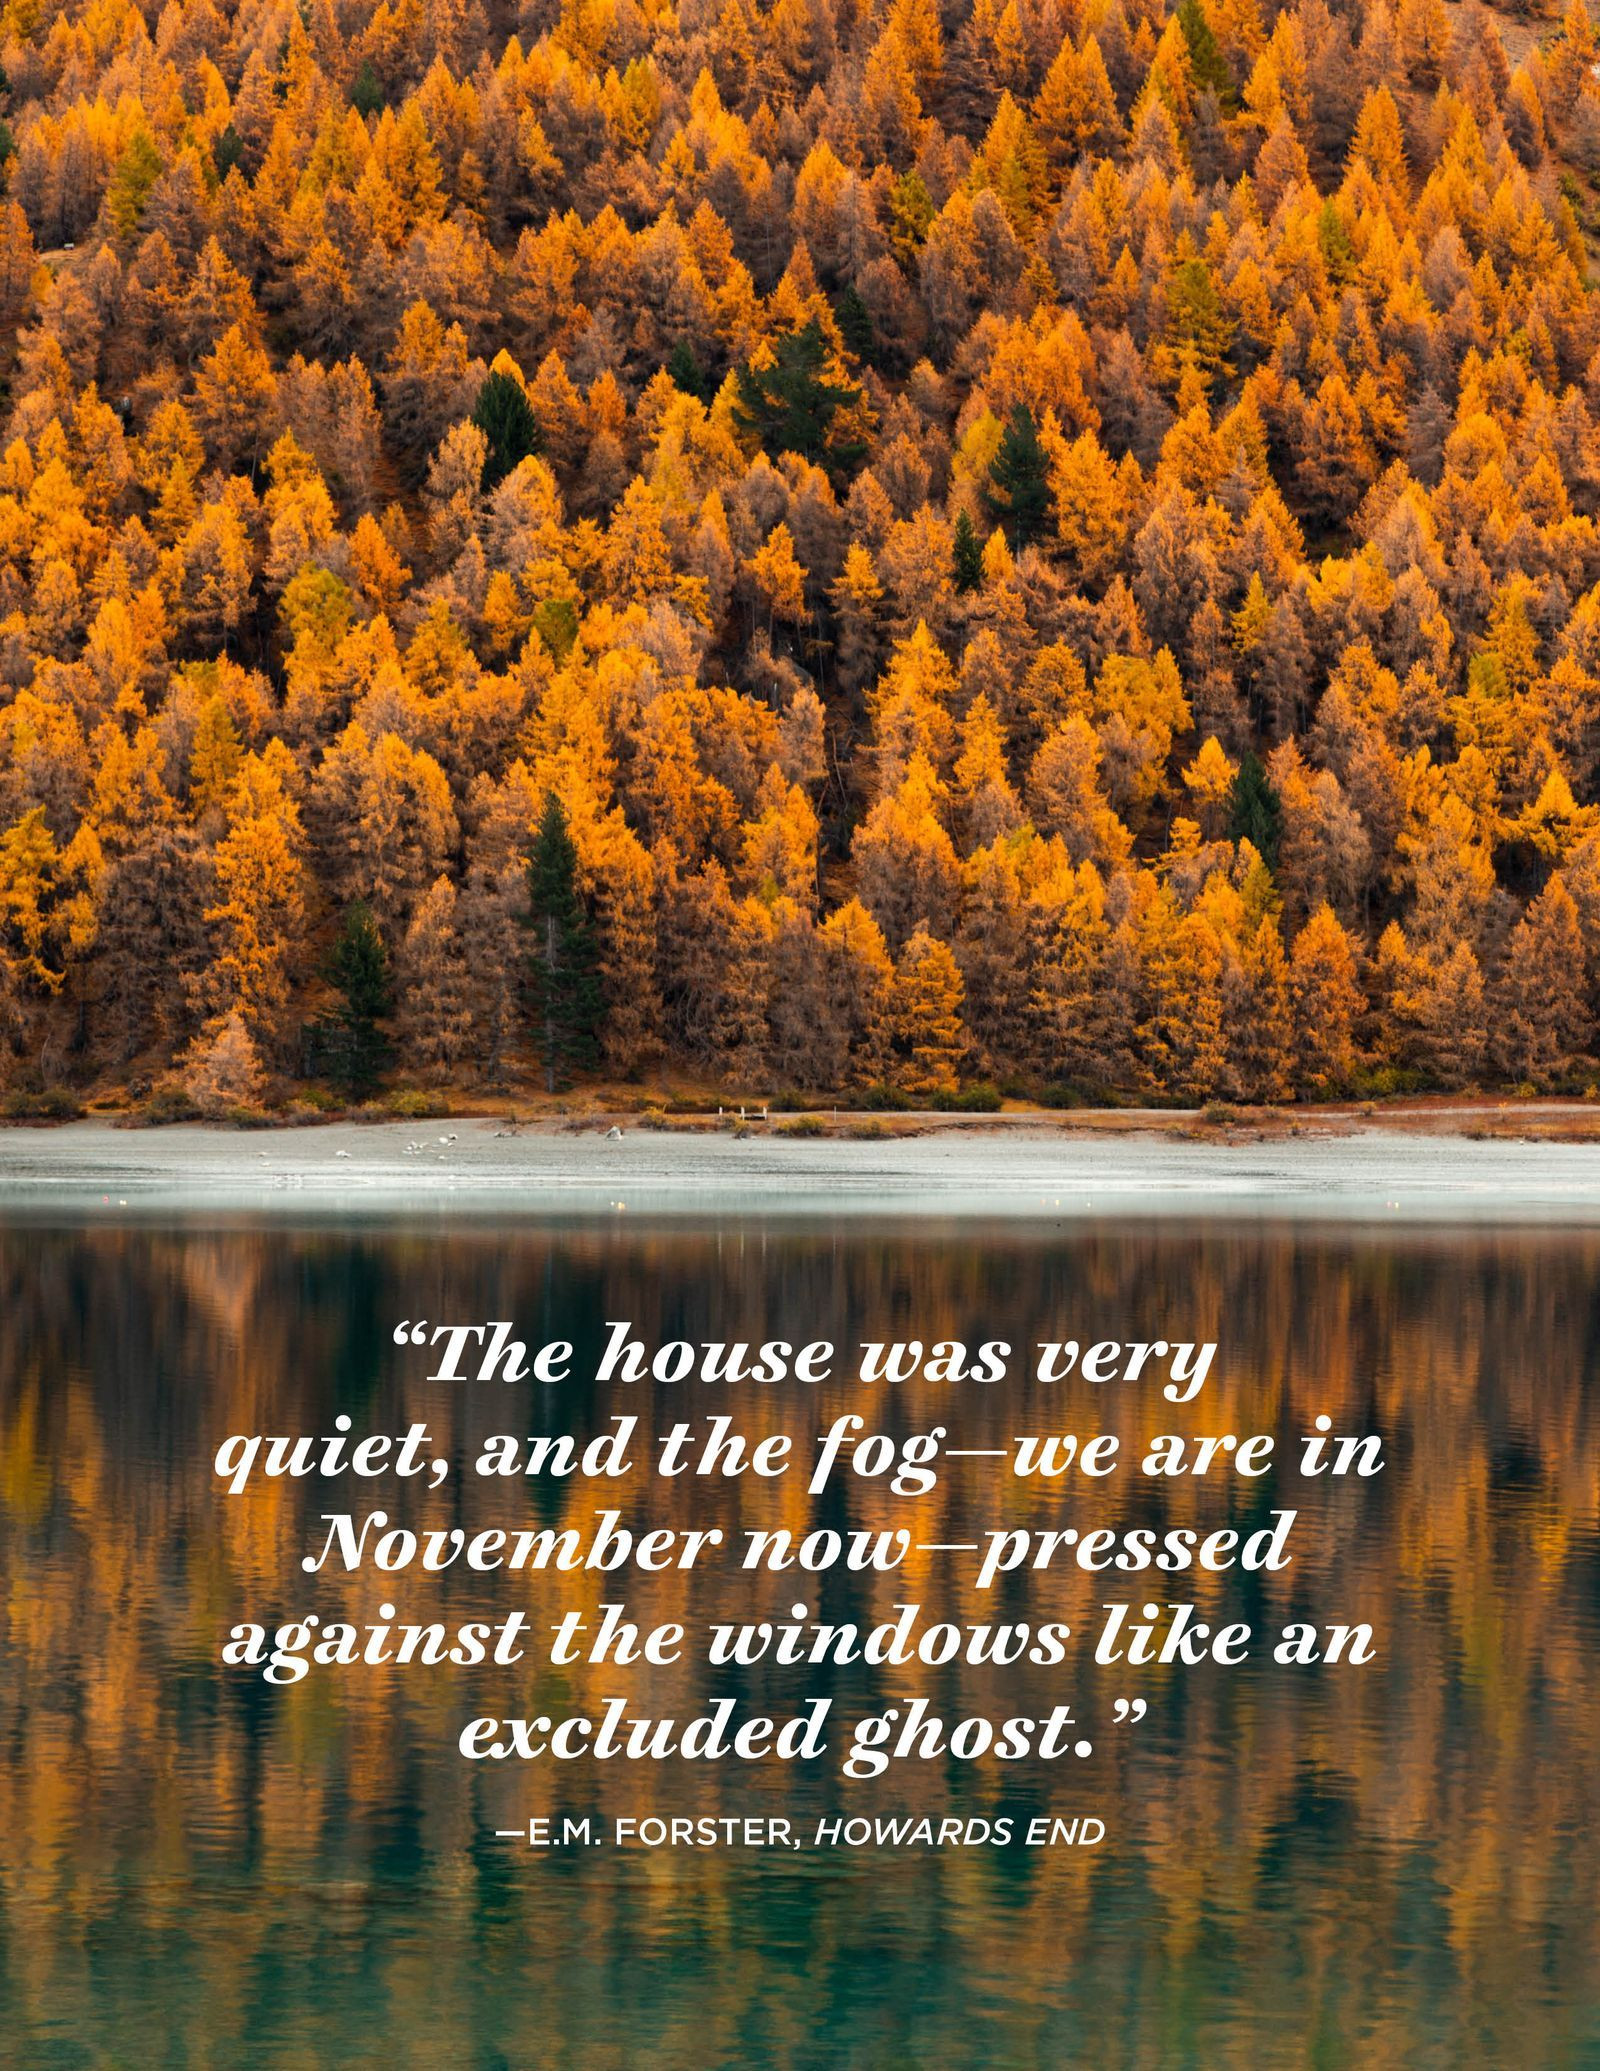 Thanksgiving Quotes Aesthetic
 20 November Quotes That Will Make You Thankful for Fall